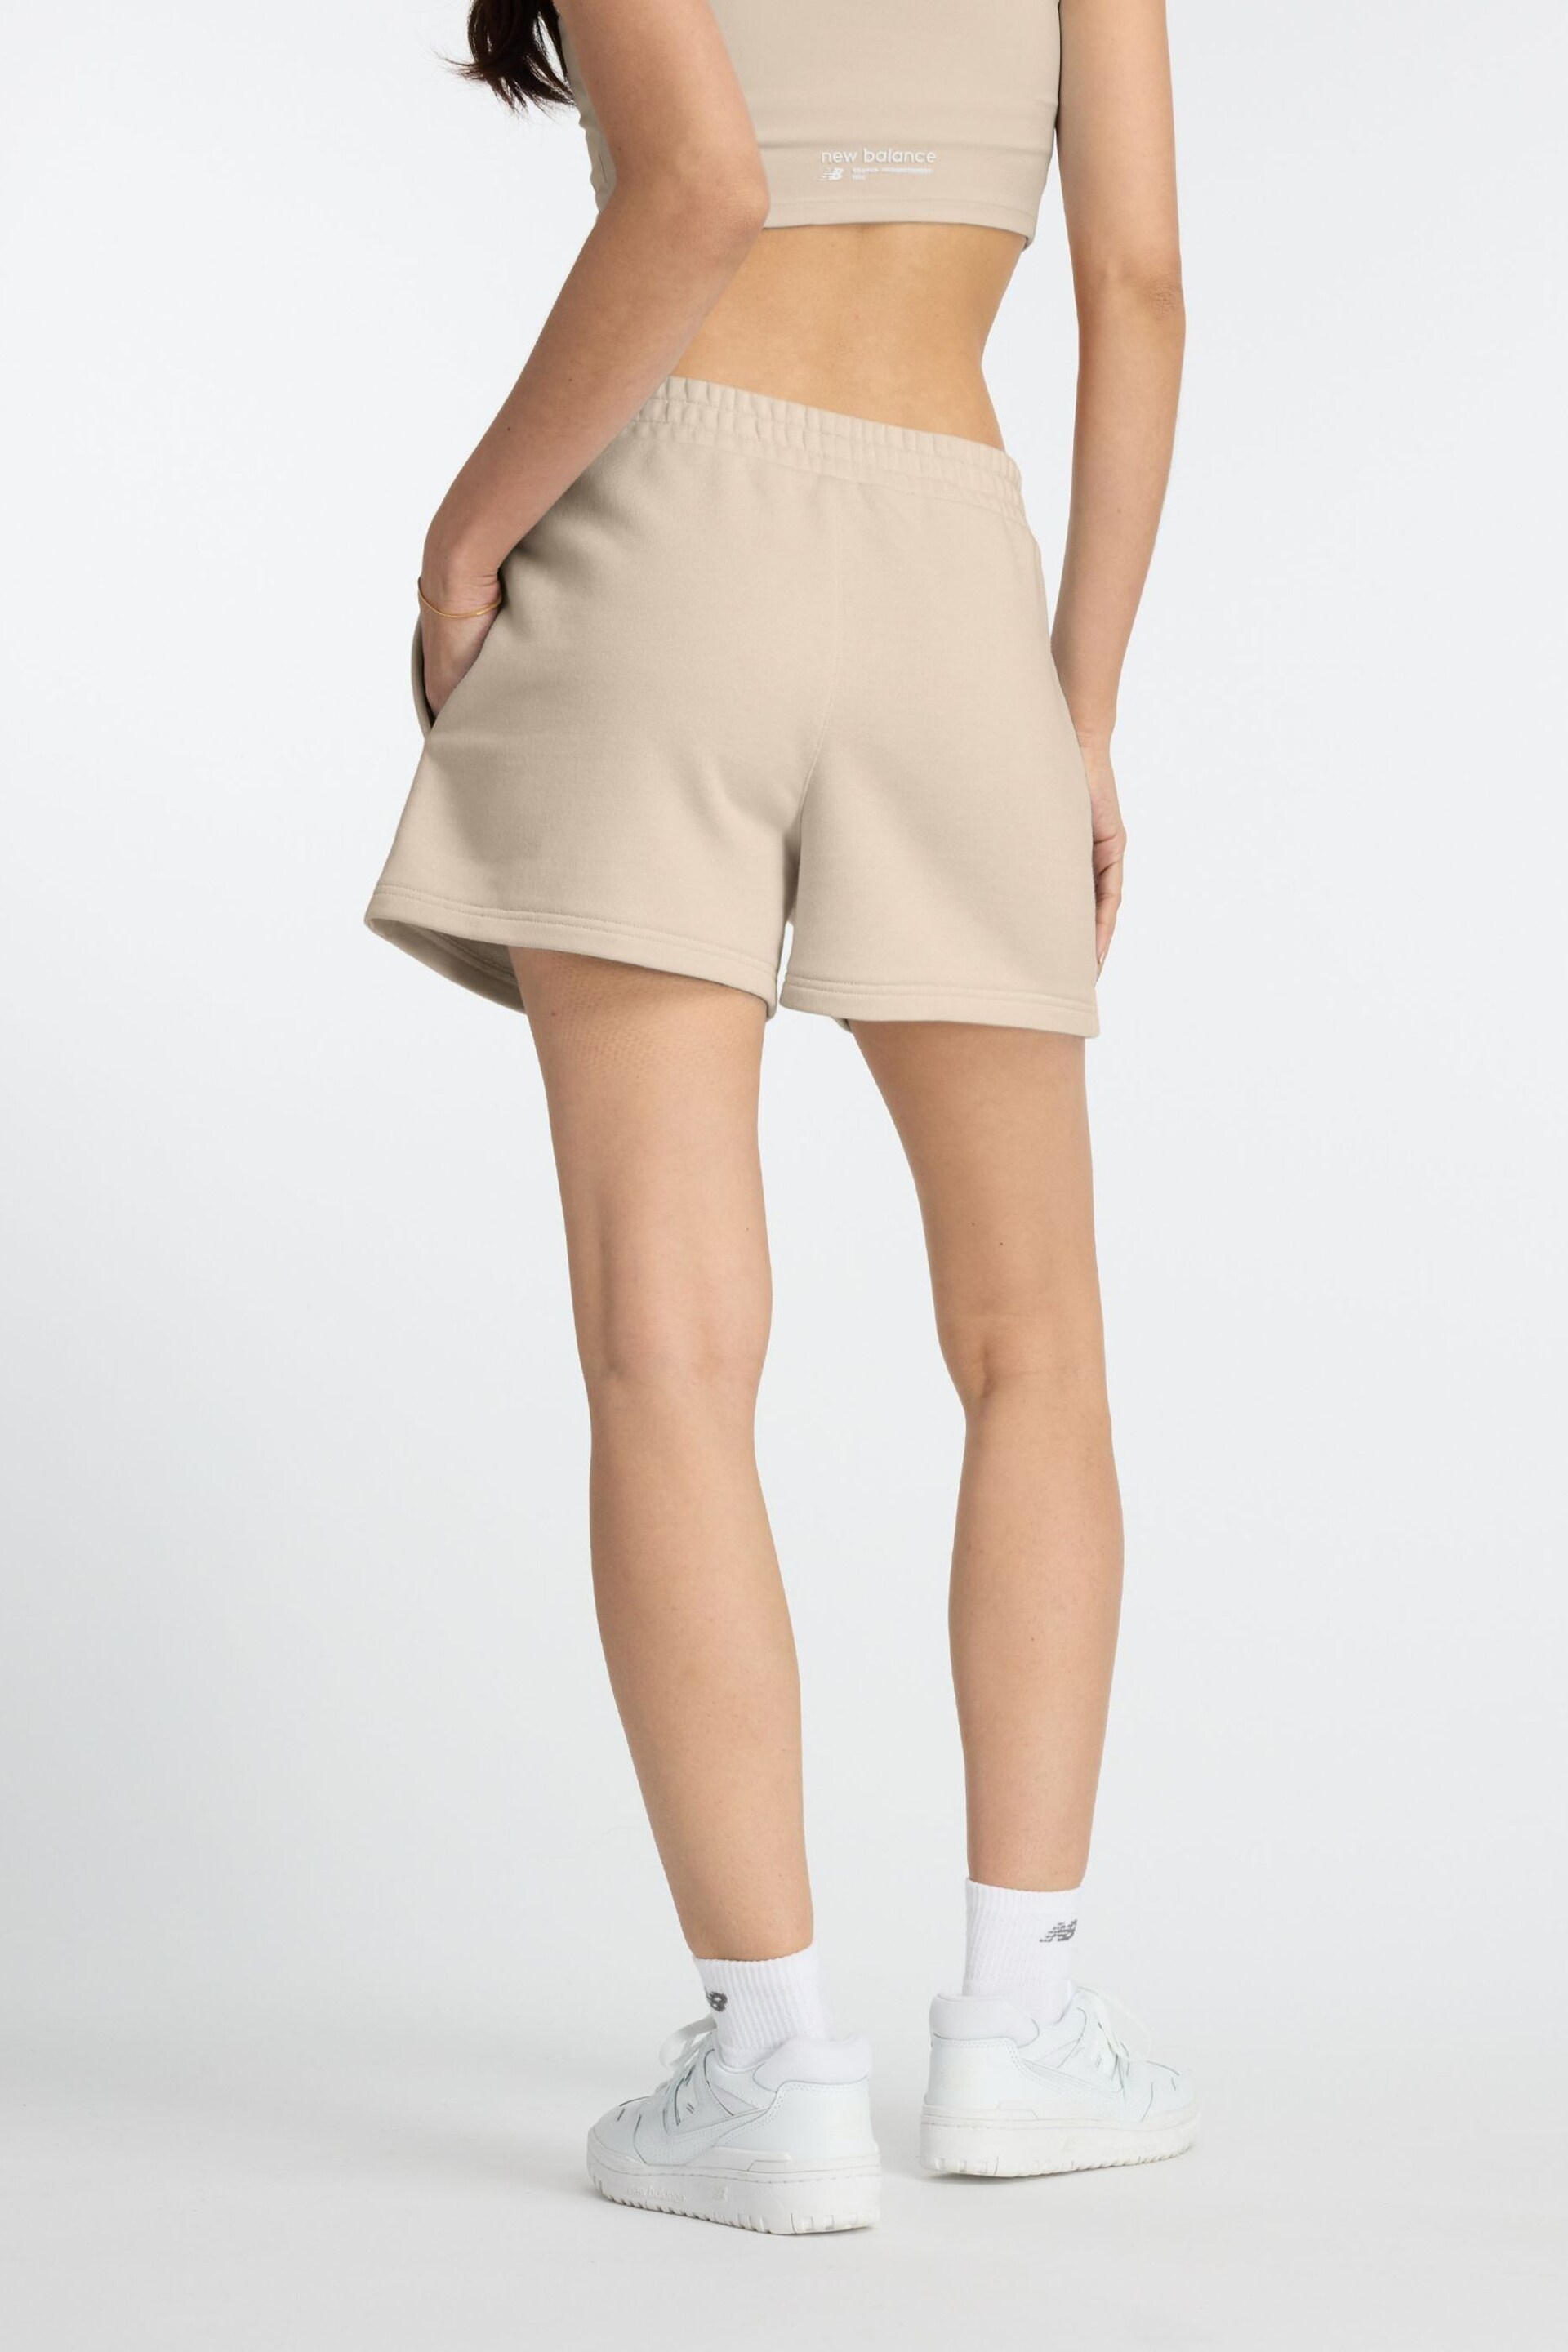 New Balance Brown Linear Heritage French Terry Shorts - Image 2 of 7